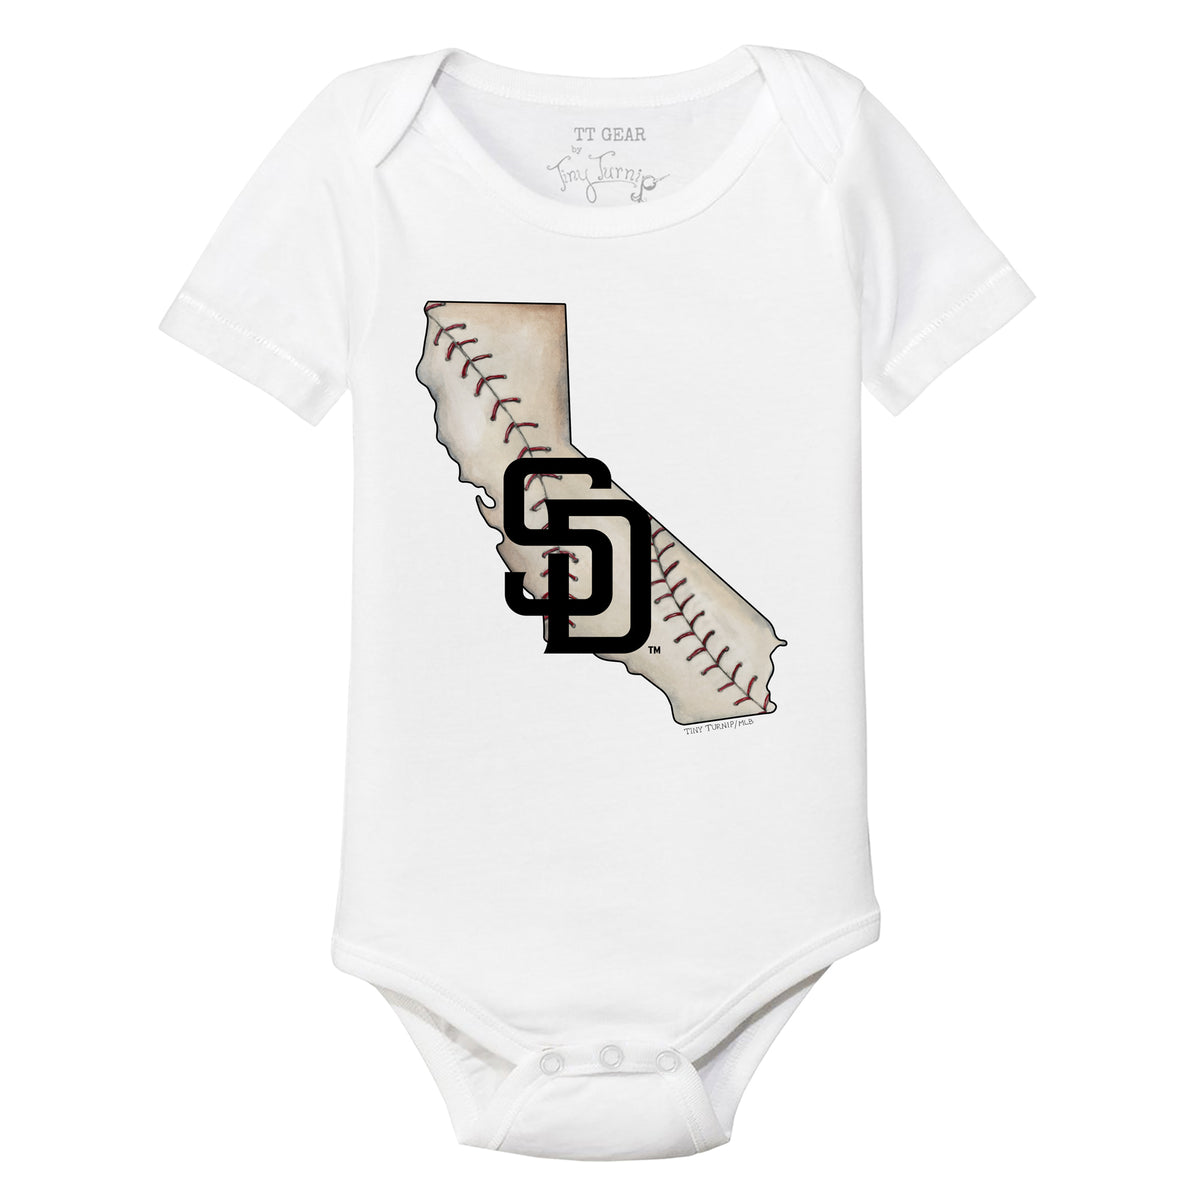 San Diego Padres Baby Clothes